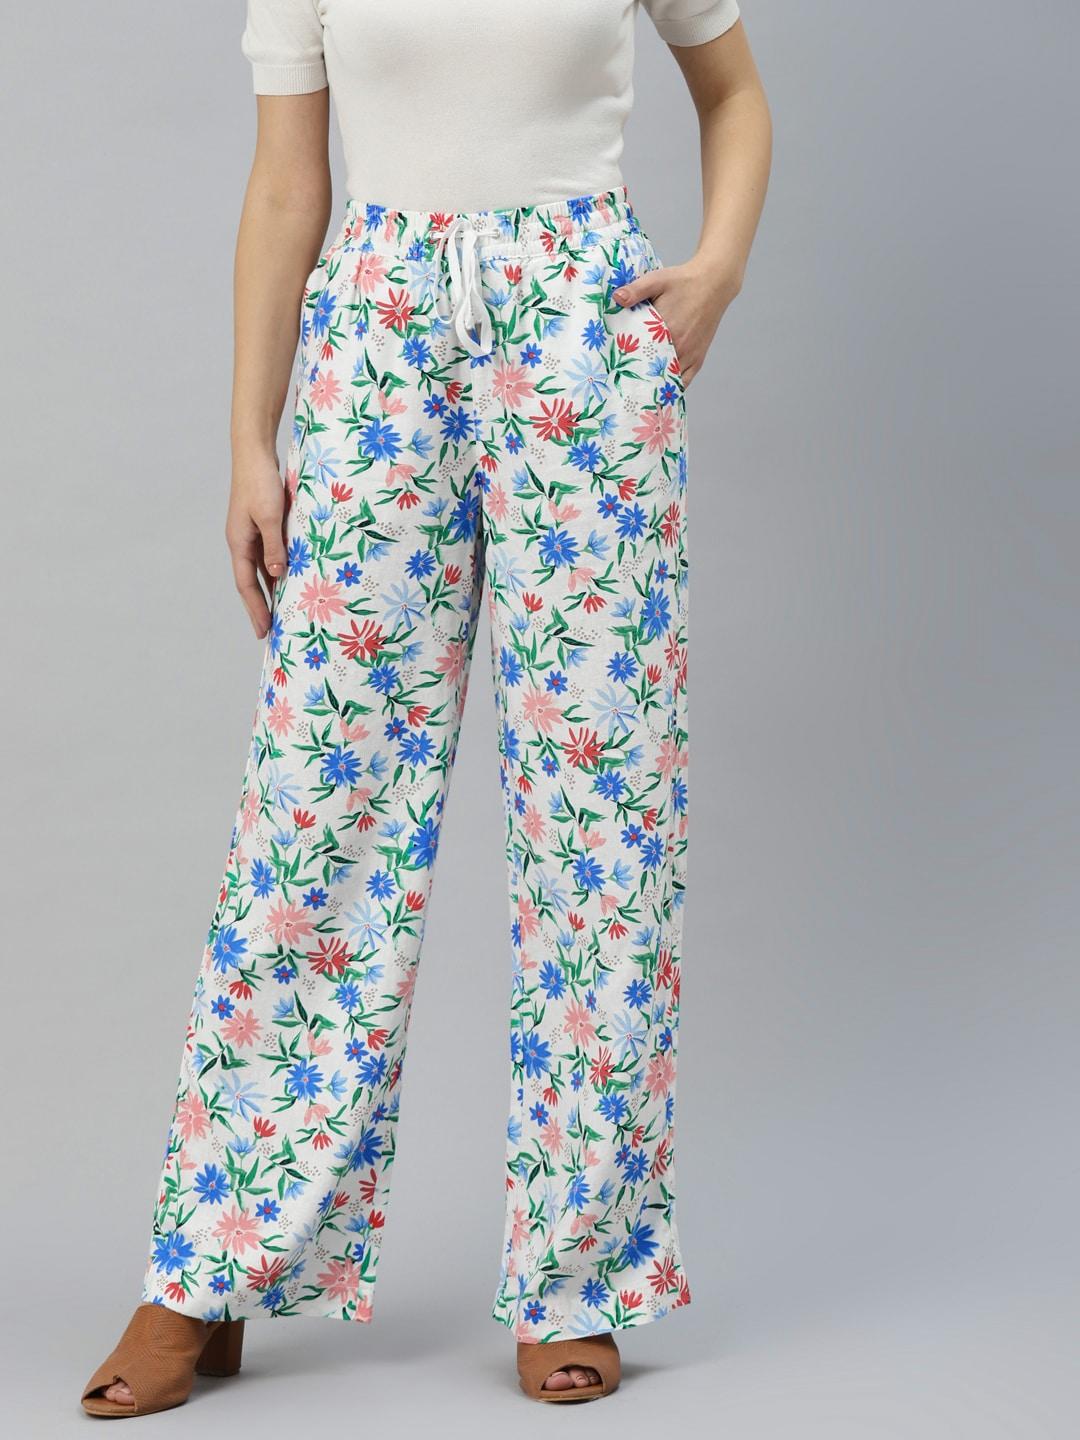 marks-&-spencer-women-white-&-blue-floral-print-trousers